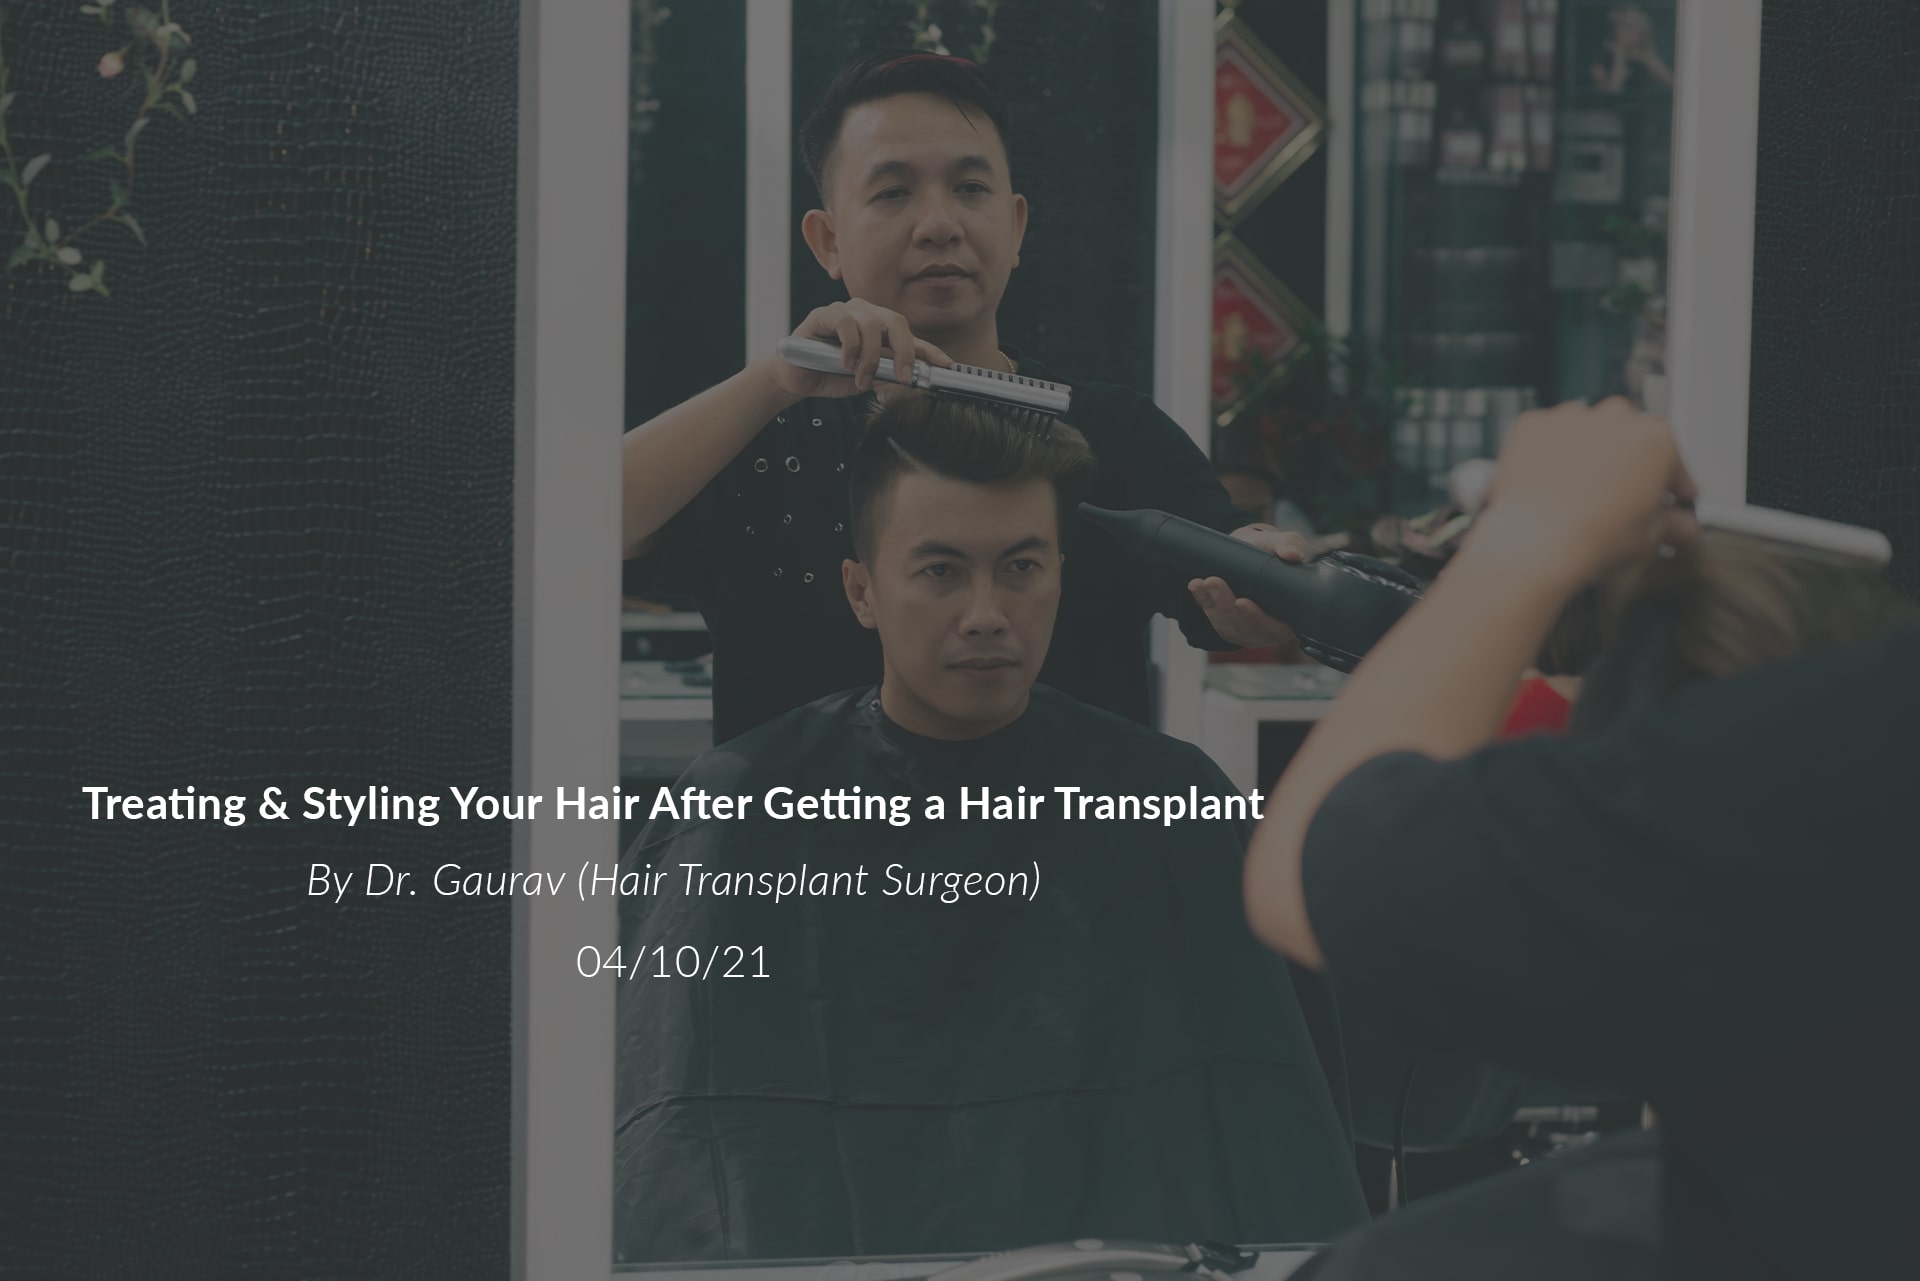 Treating & Styling Your Hair After Getting a Hair Transplant